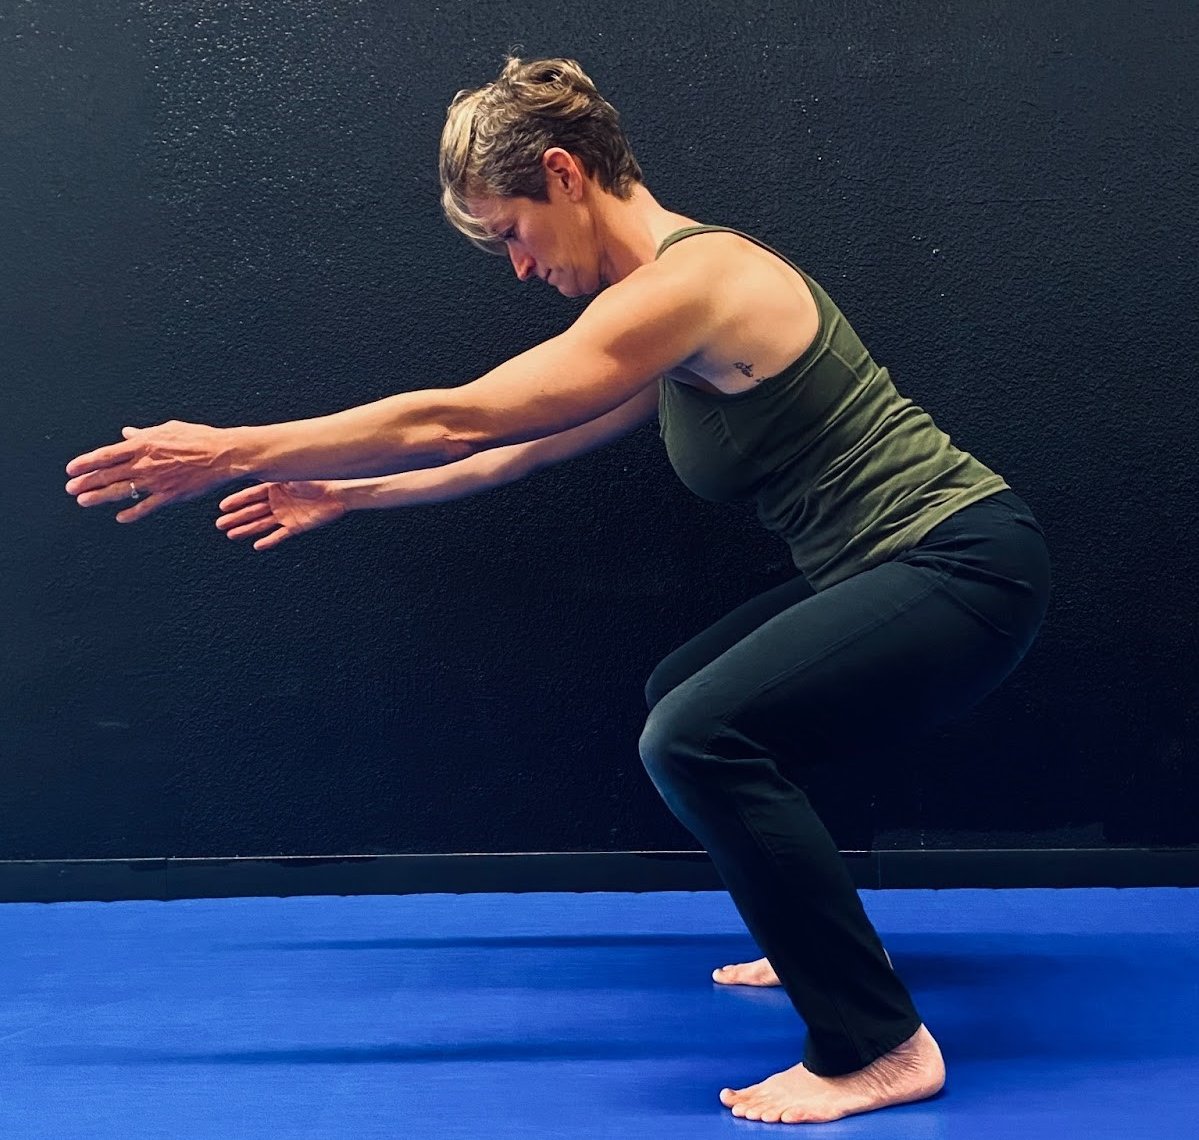 Maggie demonstrating DNS exercise Primal Squat